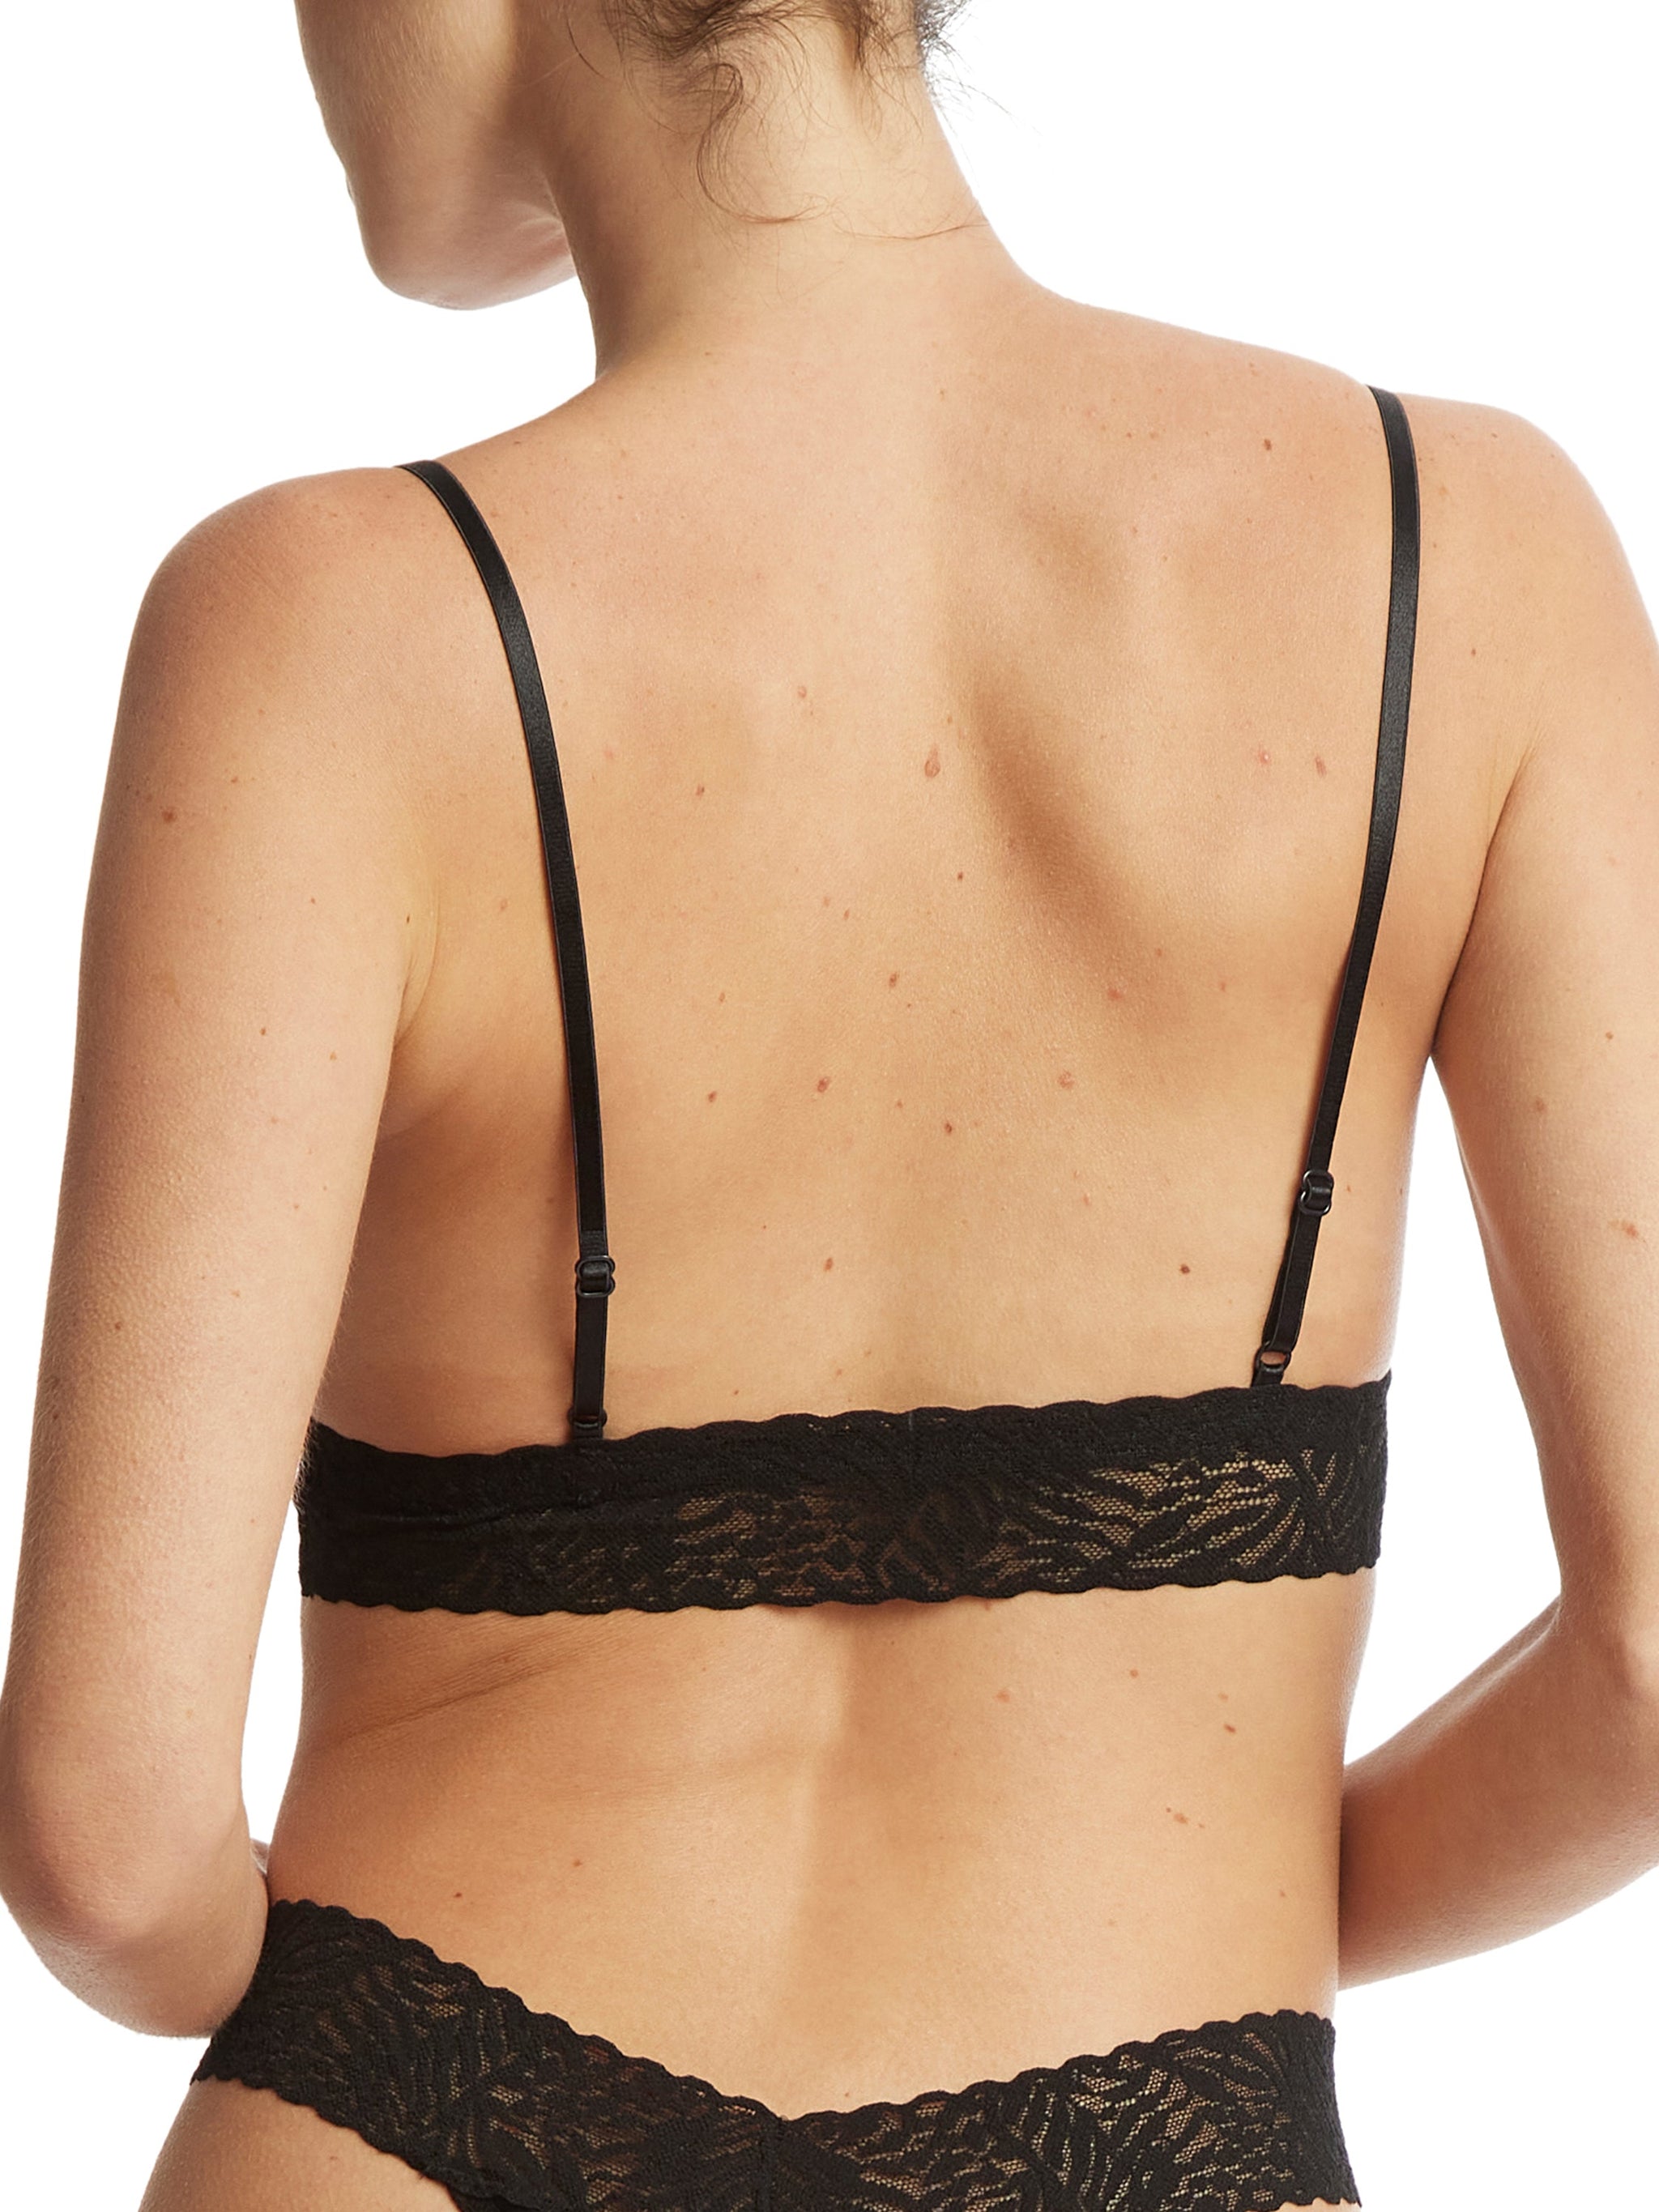 Hanky Panky Hearts Triangle Bralette  Anthropologie Singapore Official Site